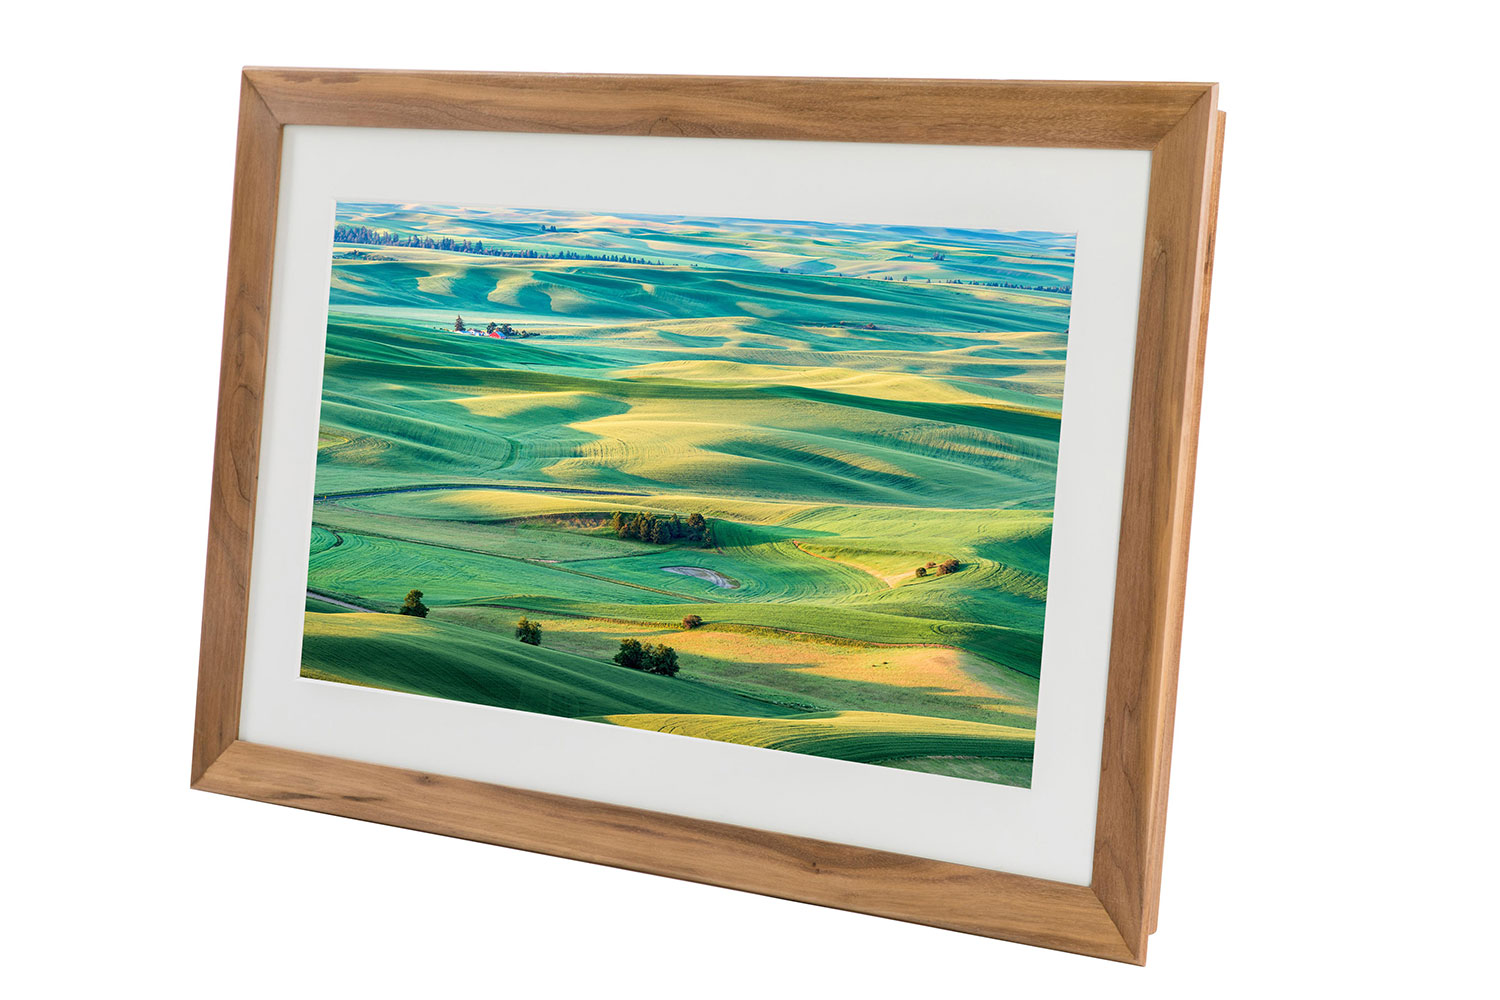 A Meural digital canvas can display famous artwork, or your own photos.
Courtesy Best Buy